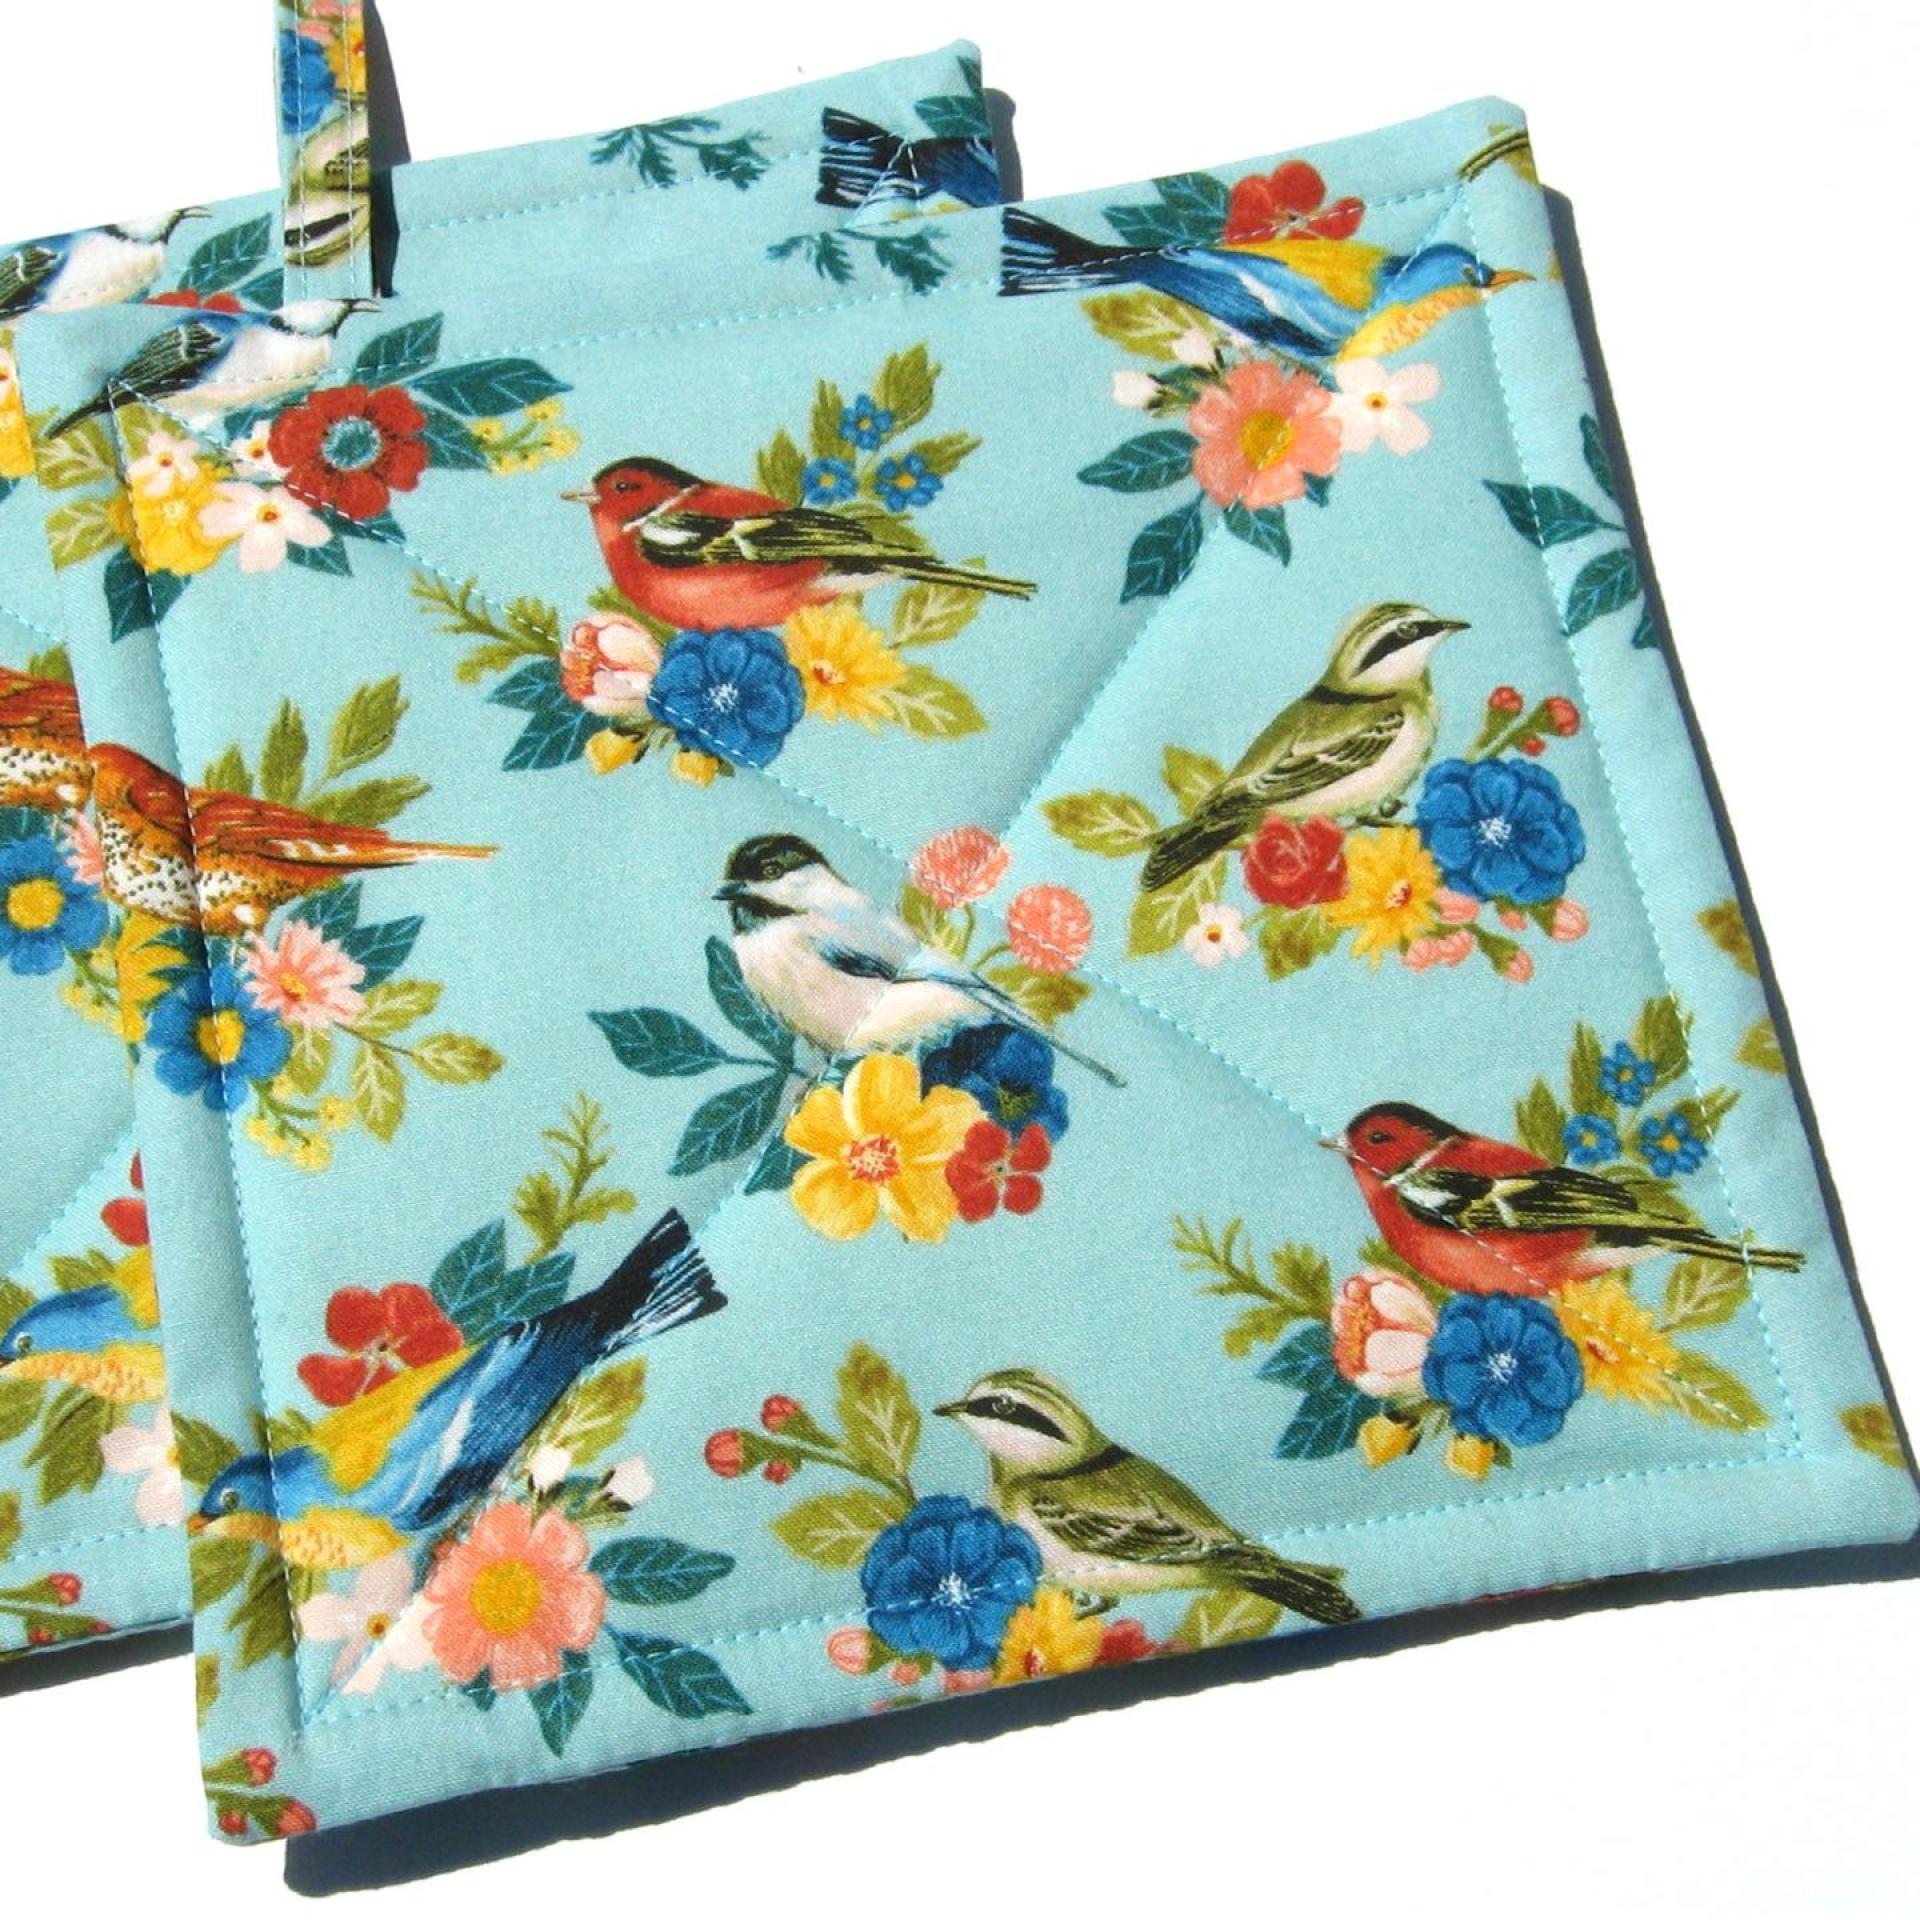 Summer Birds Potholders, Colorful Birds and Bunches of Flowers, Quilted Hot Pads, USA Made Housewarming, Hostess Gift